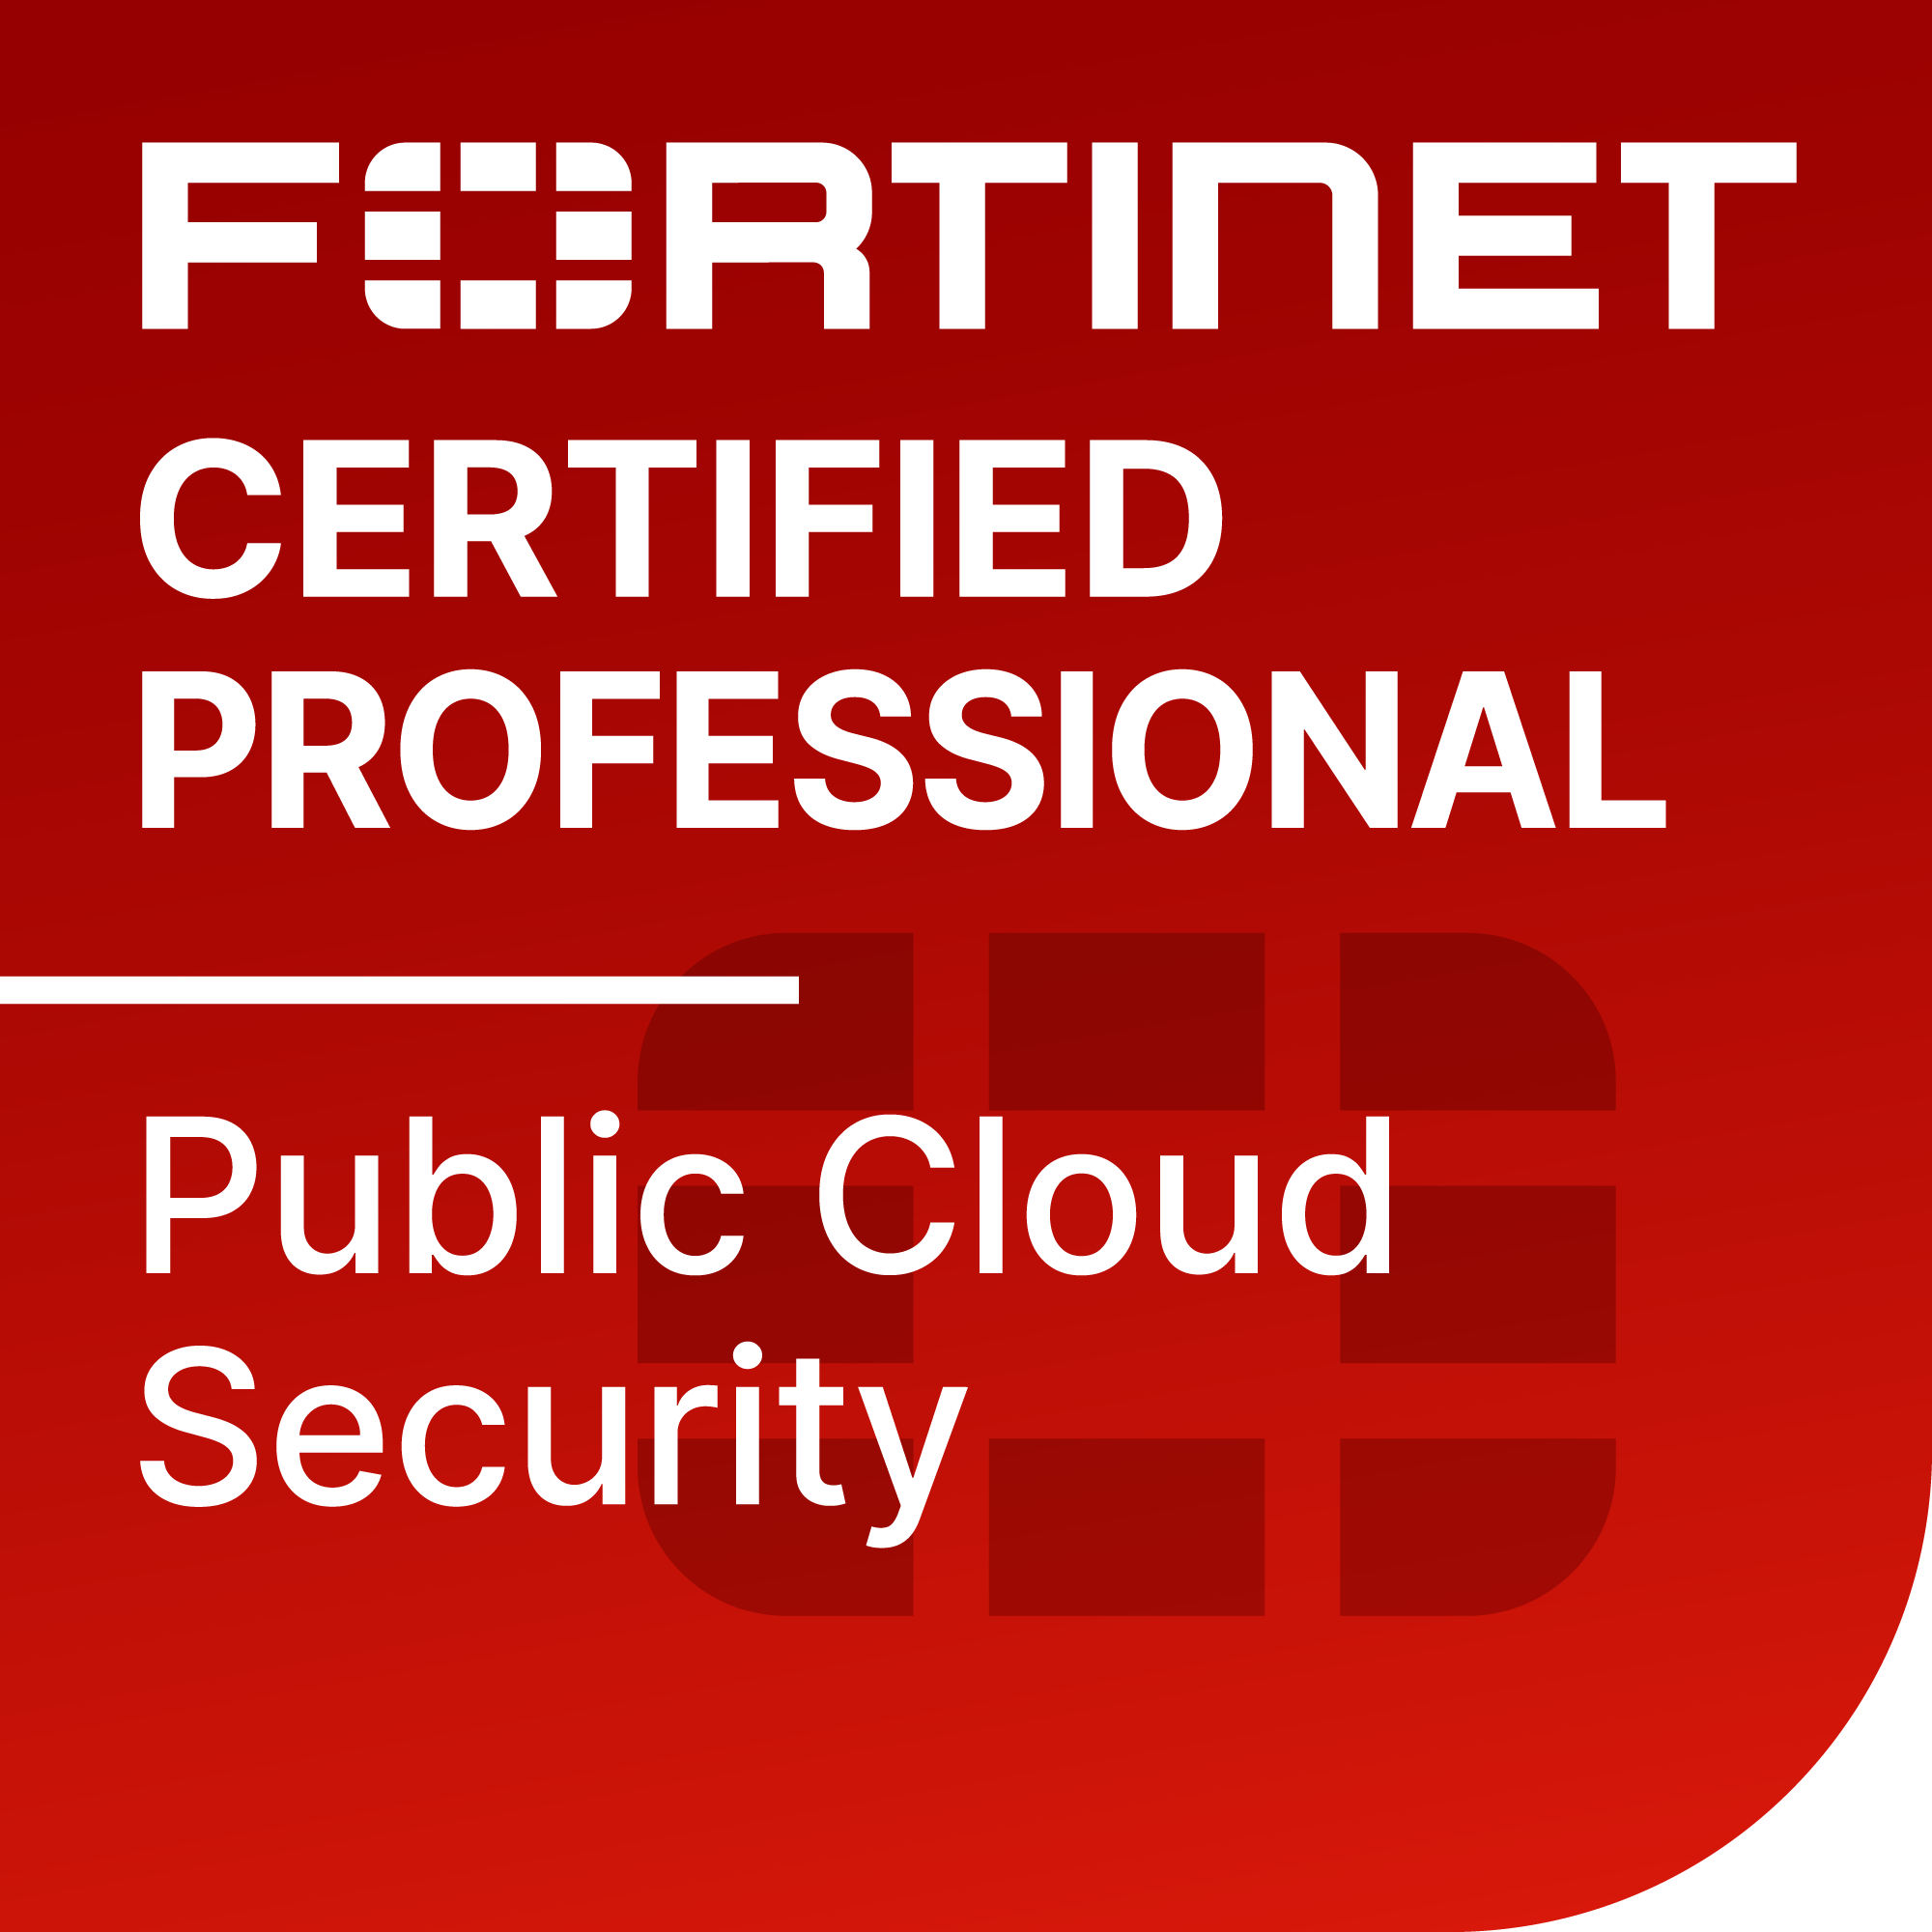 Fortinet Certified Professional Public Cloud Security badge